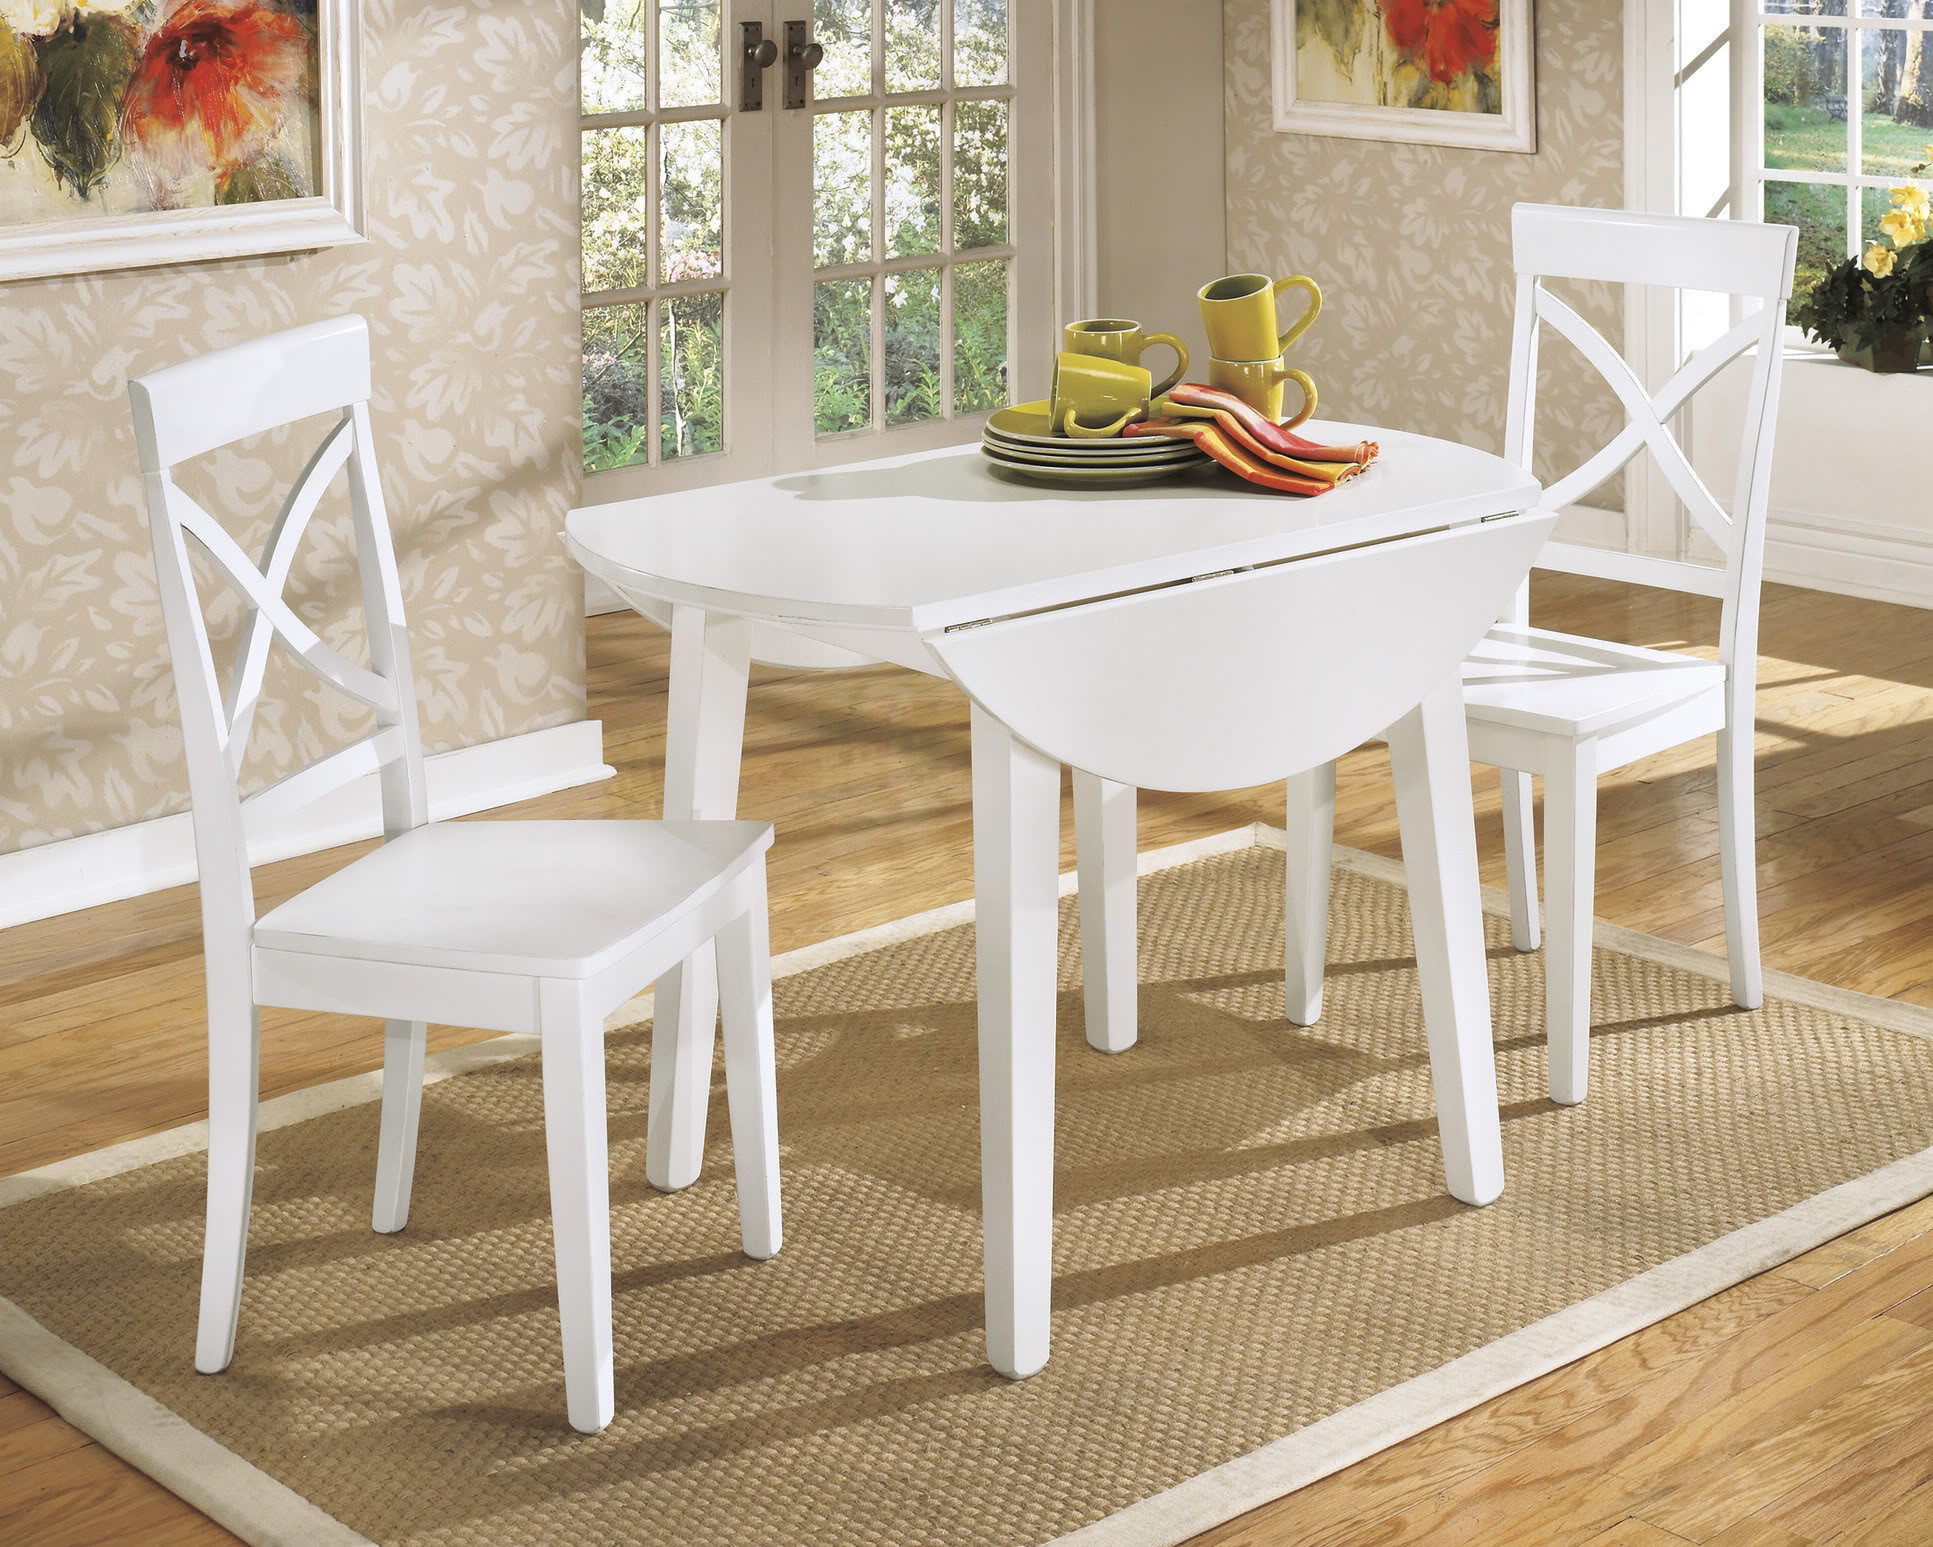 Small Kitchen Table And Chairs
 White Round Kitchen Table and Chairs Design – HomesFeed